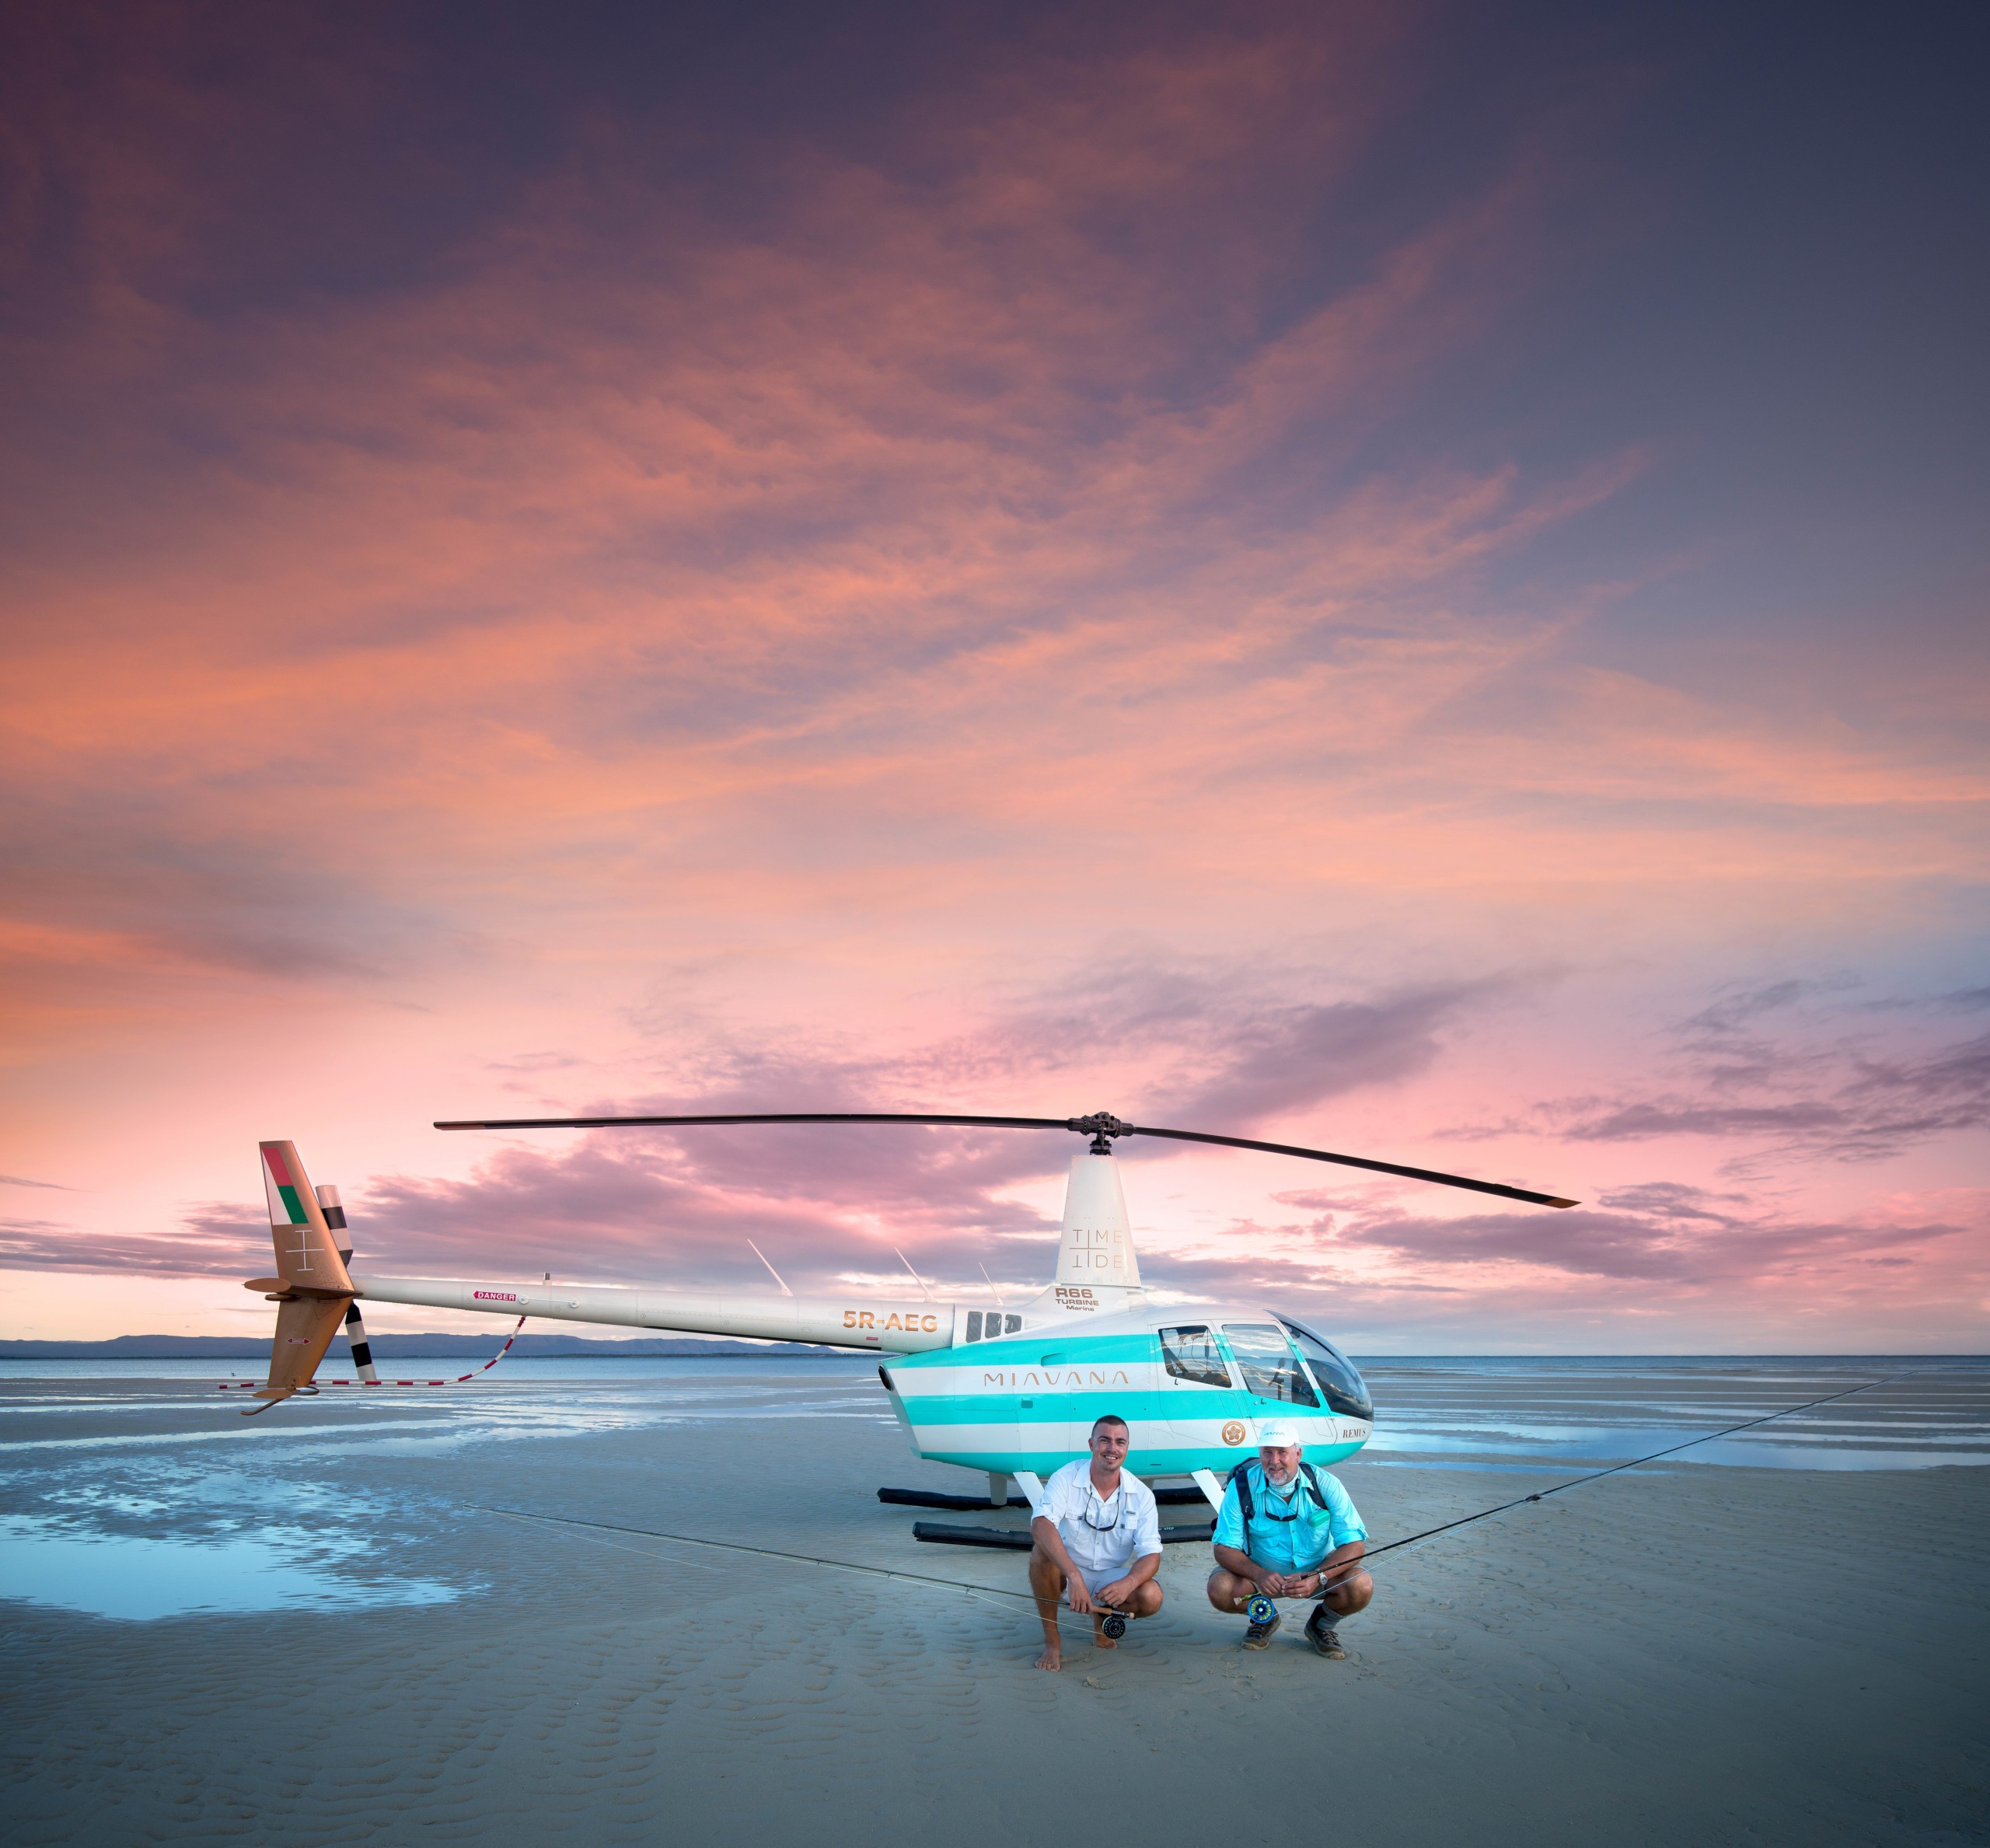 Helicopter and two fisherman on vacation